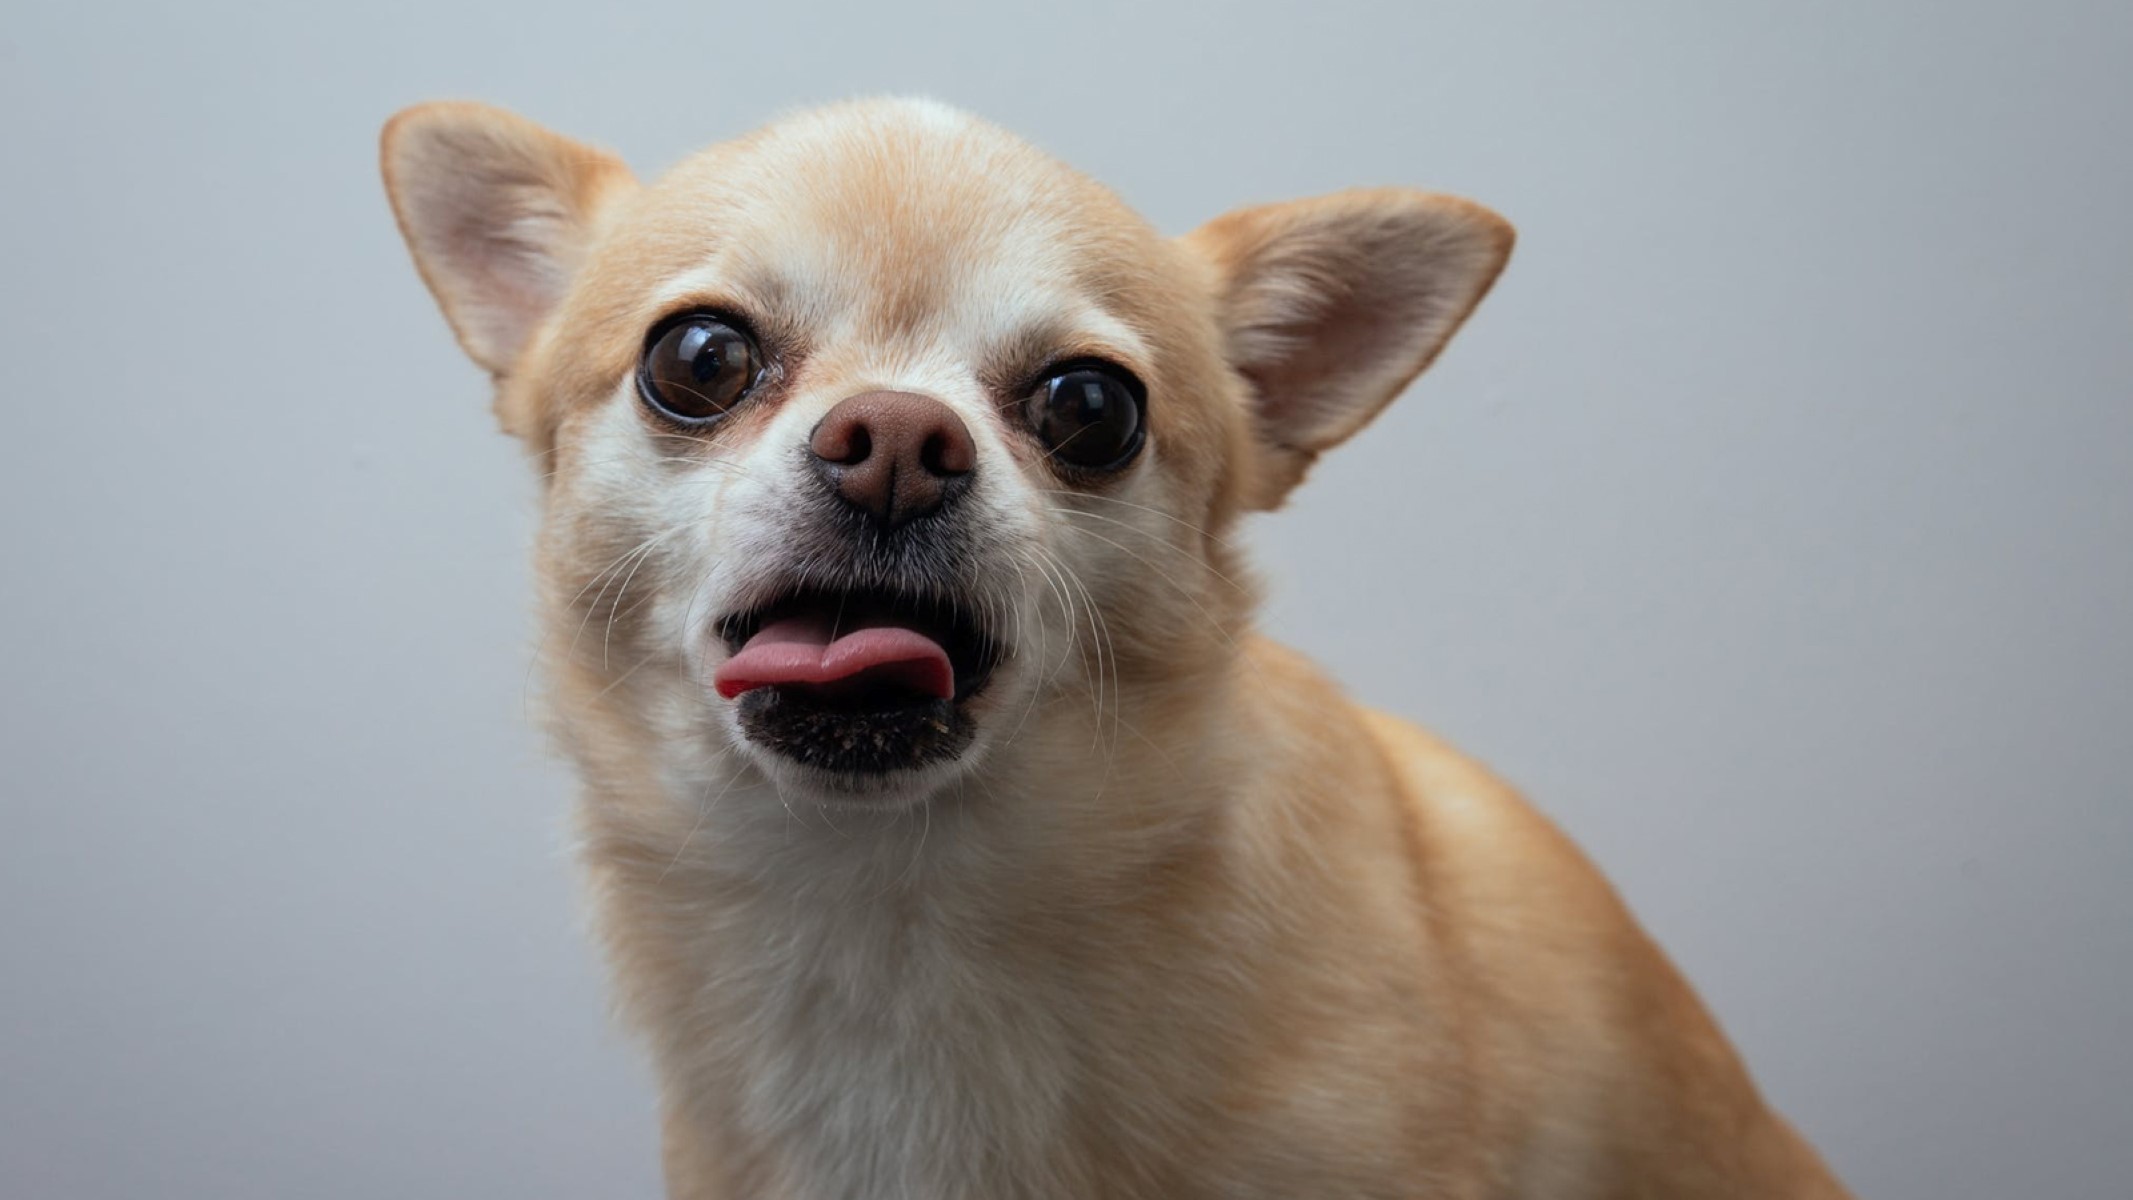 Shocking Revelation: Chihuahua’s Tongue Mysteriously Hangs Out Of Mouth!